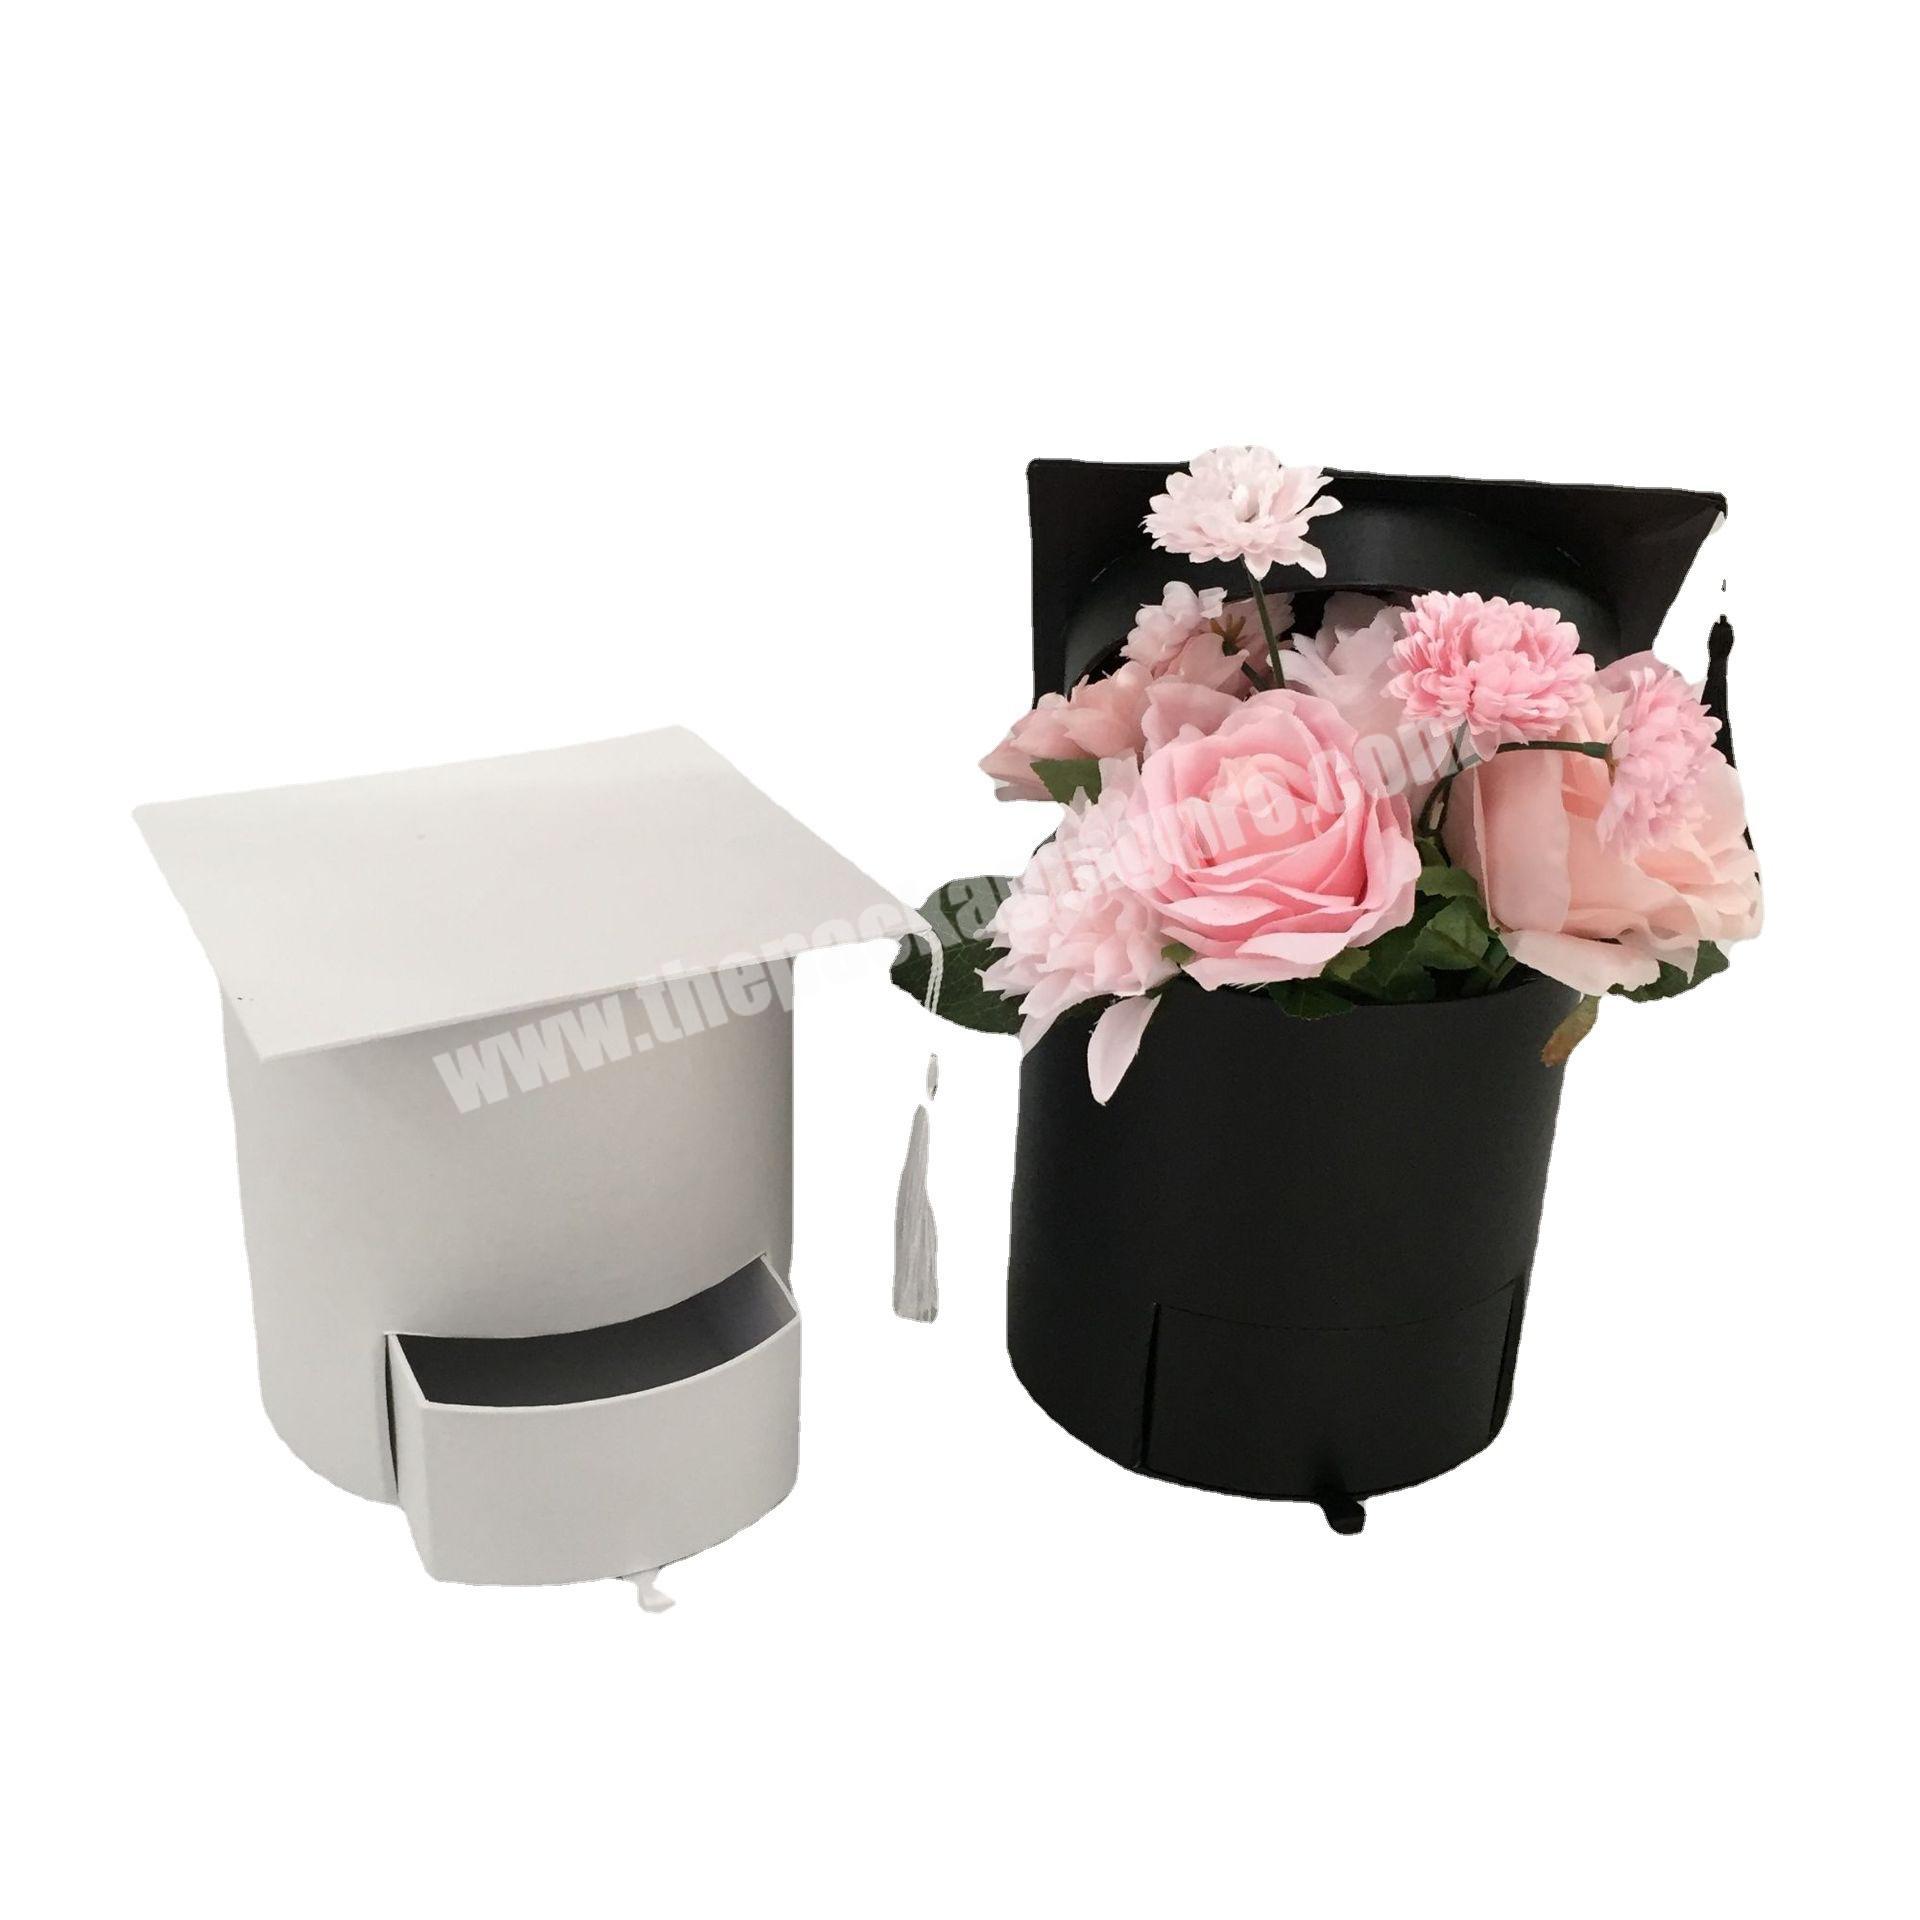 New Arrival Graduation Round Paper Flower Gift Box Immortal Real Flower Arrangement Packaging Box With Drawer And Tassels